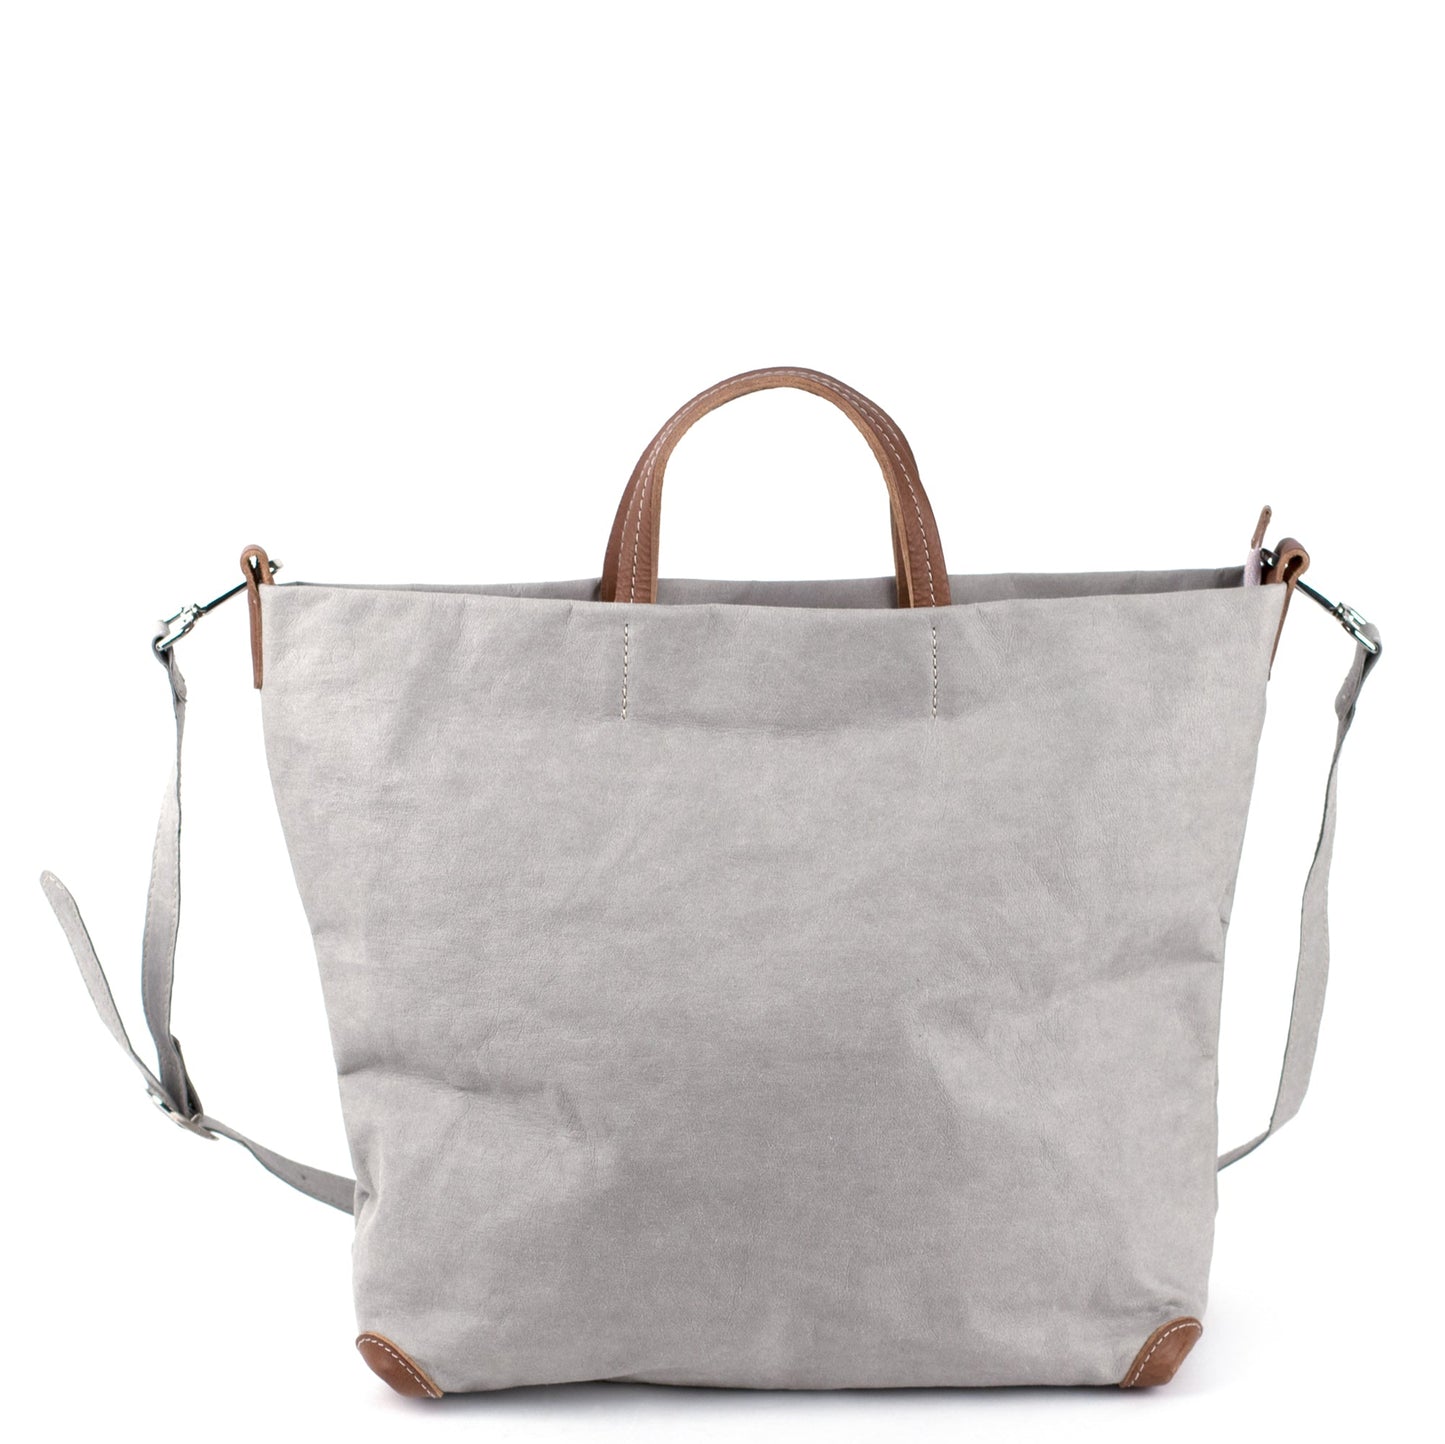 A square grey washable paper tote bag is shown with one long grey shoulder strap and two small tan handles. The corners of the bag are protected by brown corners.